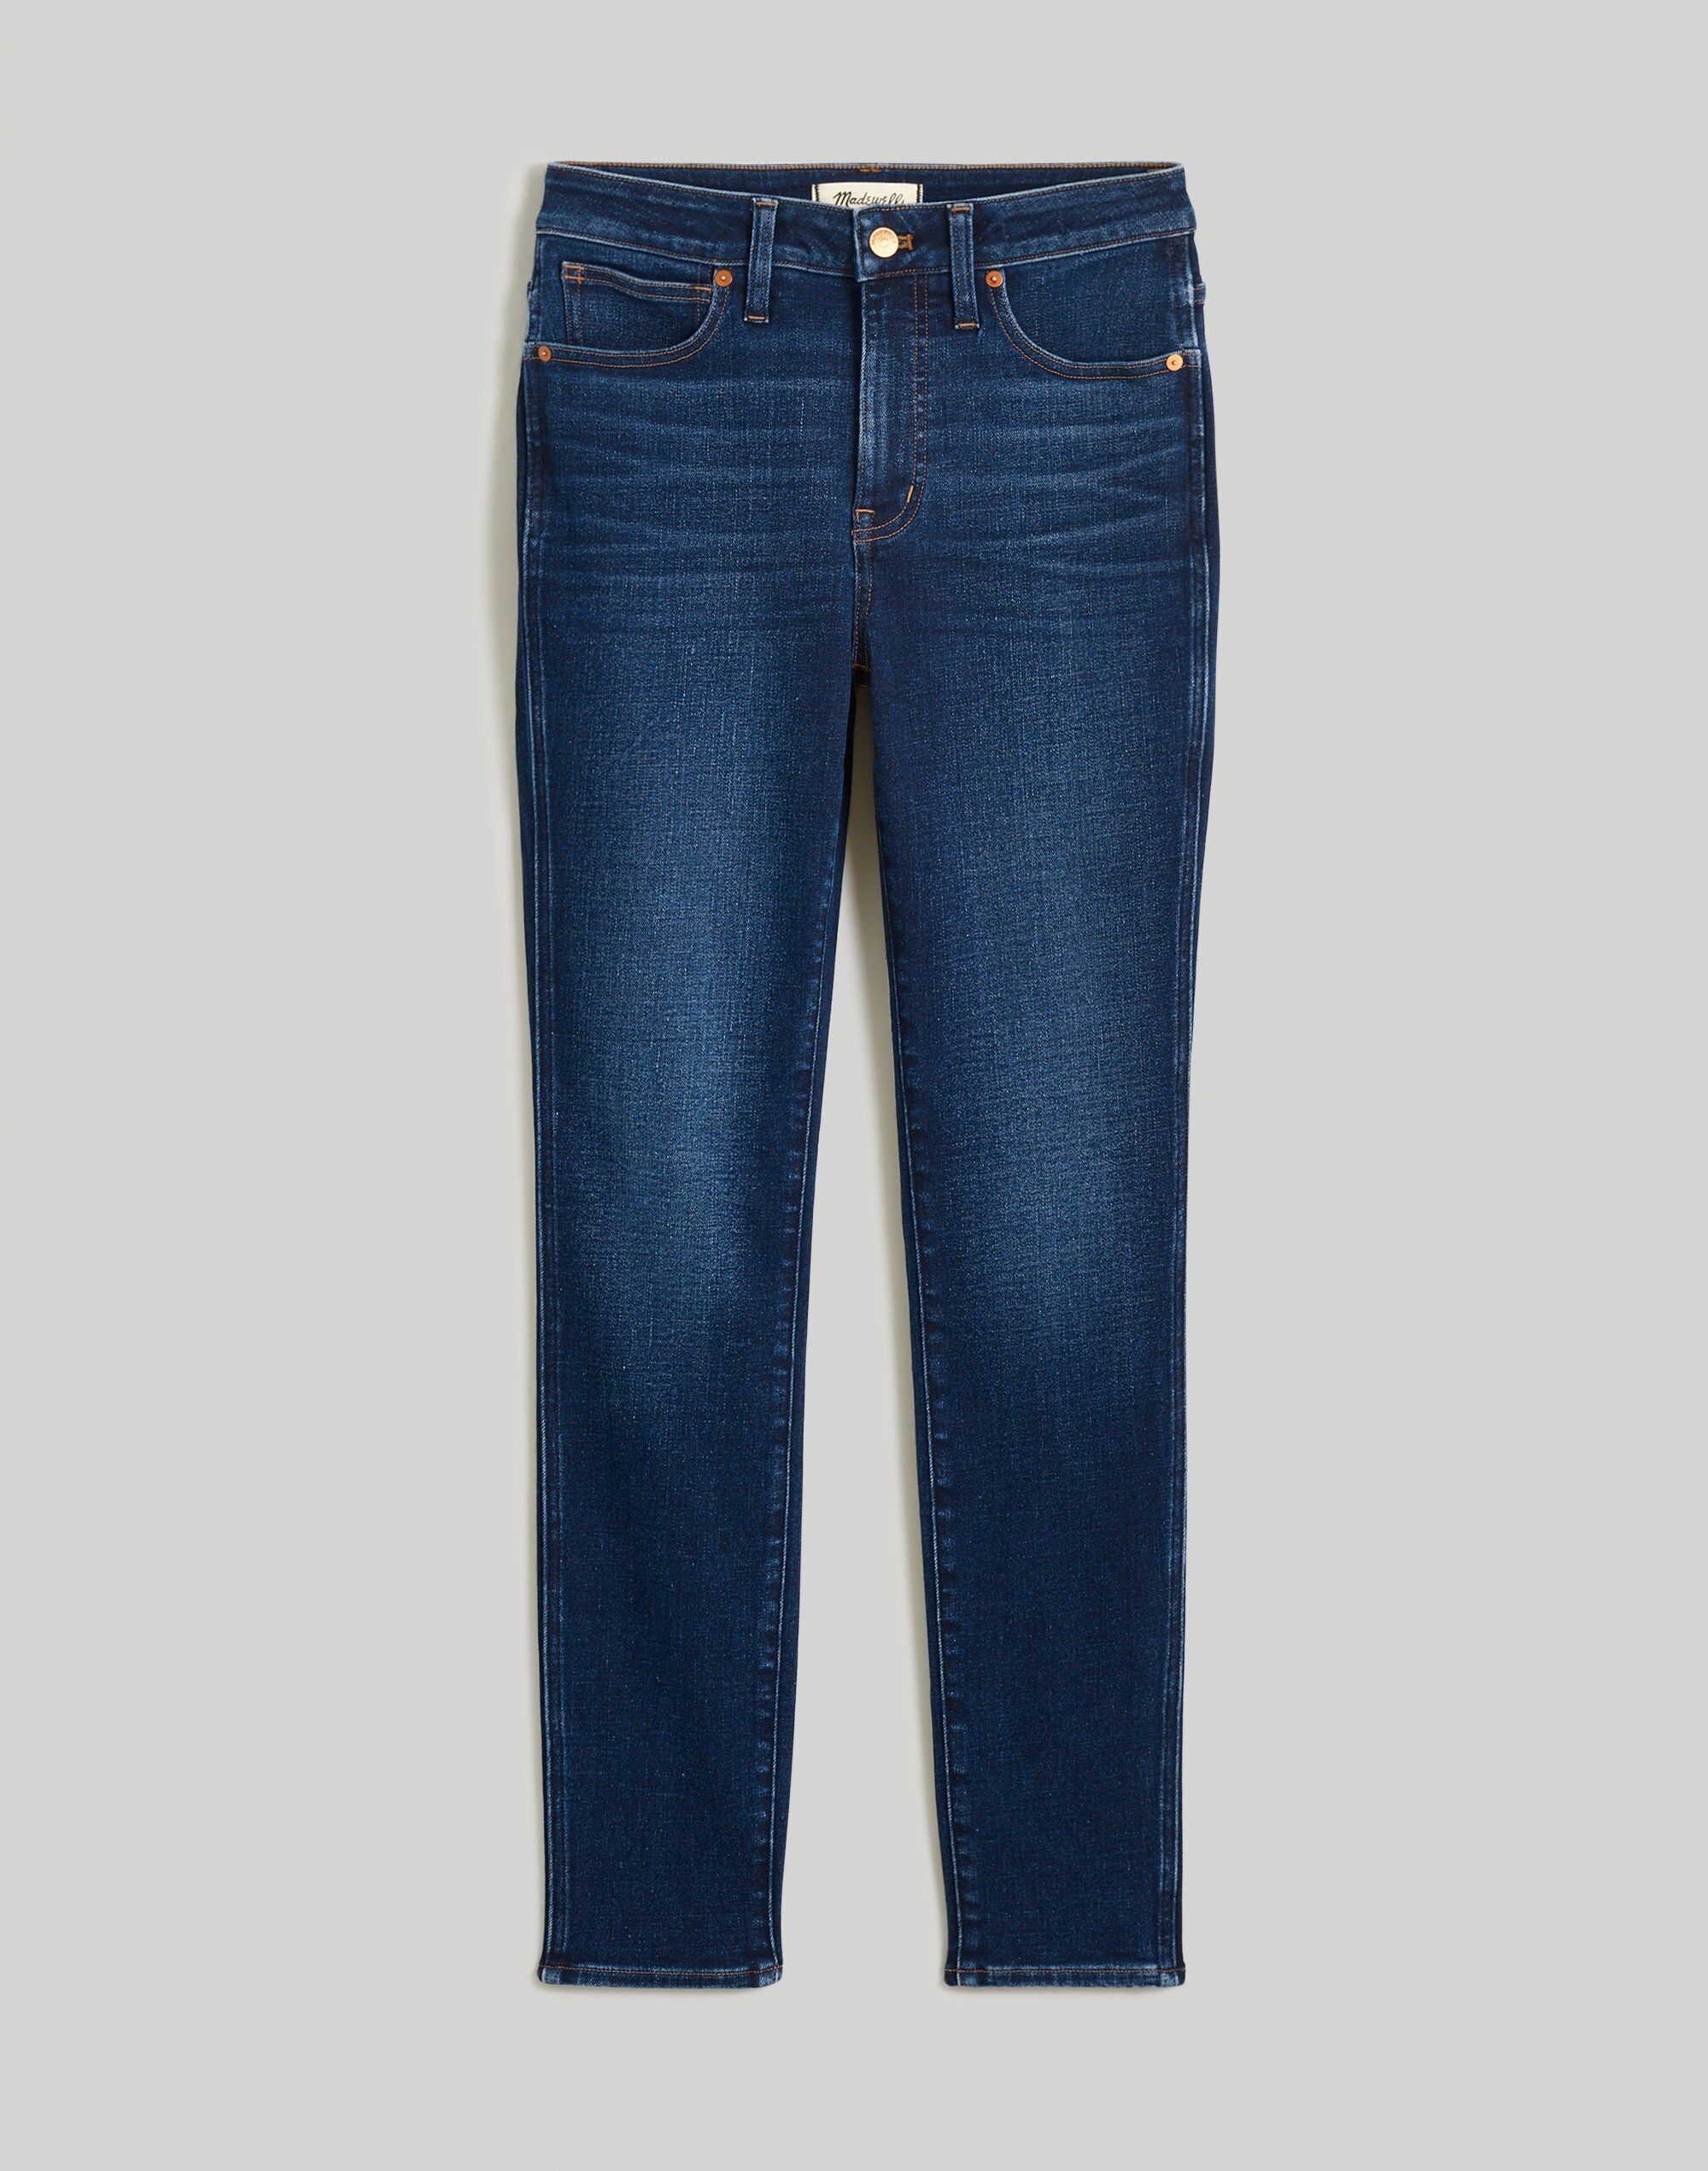 Plus Curvy 10" High-Rise Skinny Jeans in Kingston Wash